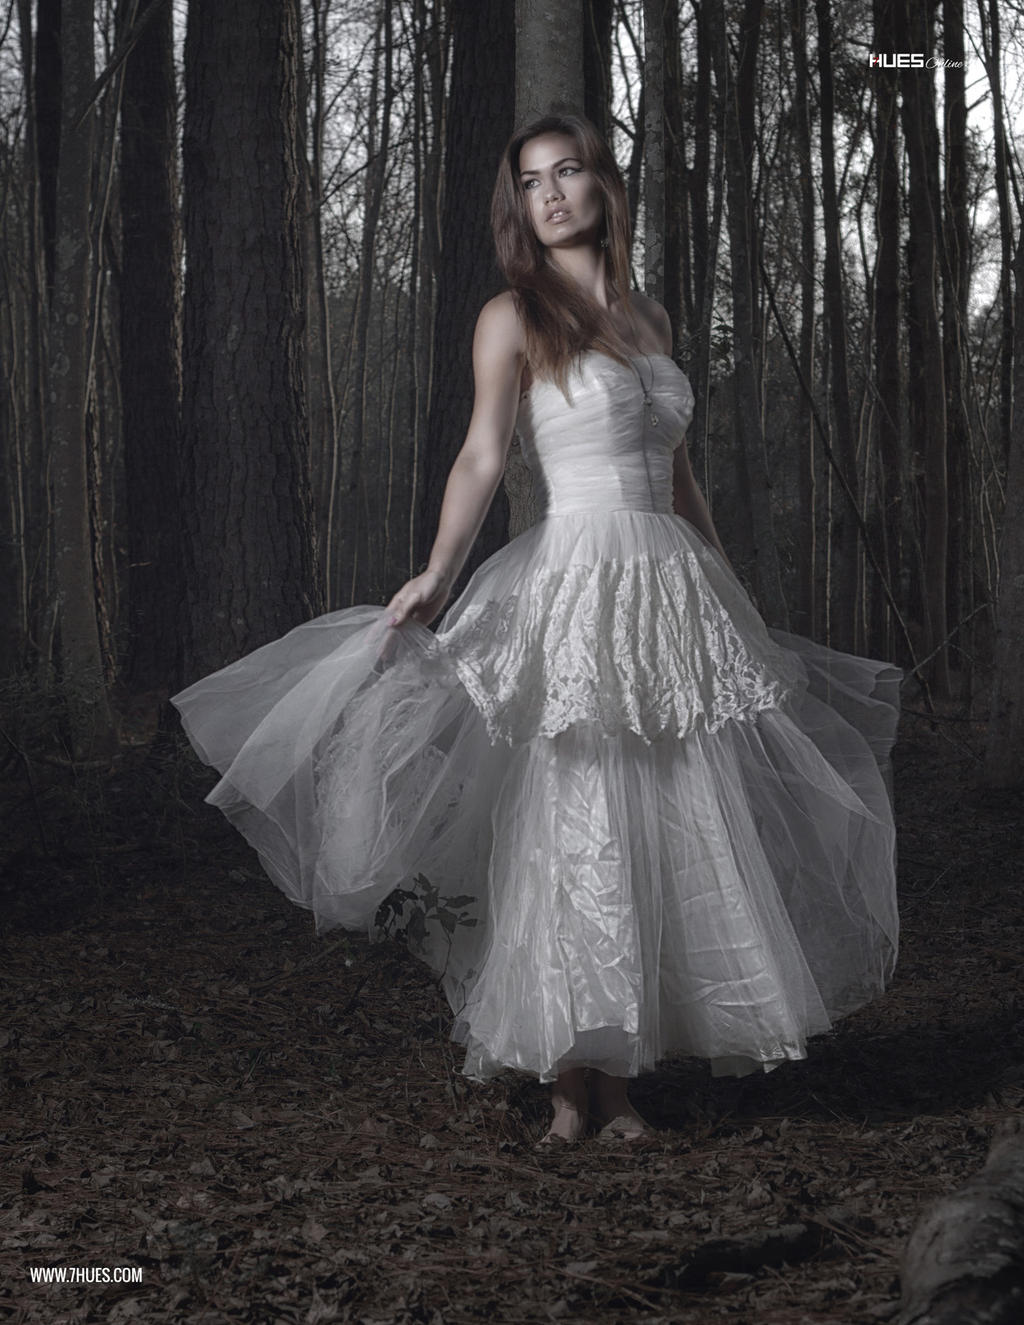 Into the Woods for 7Hues Webitorial by MadSDesignz on DeviantArt